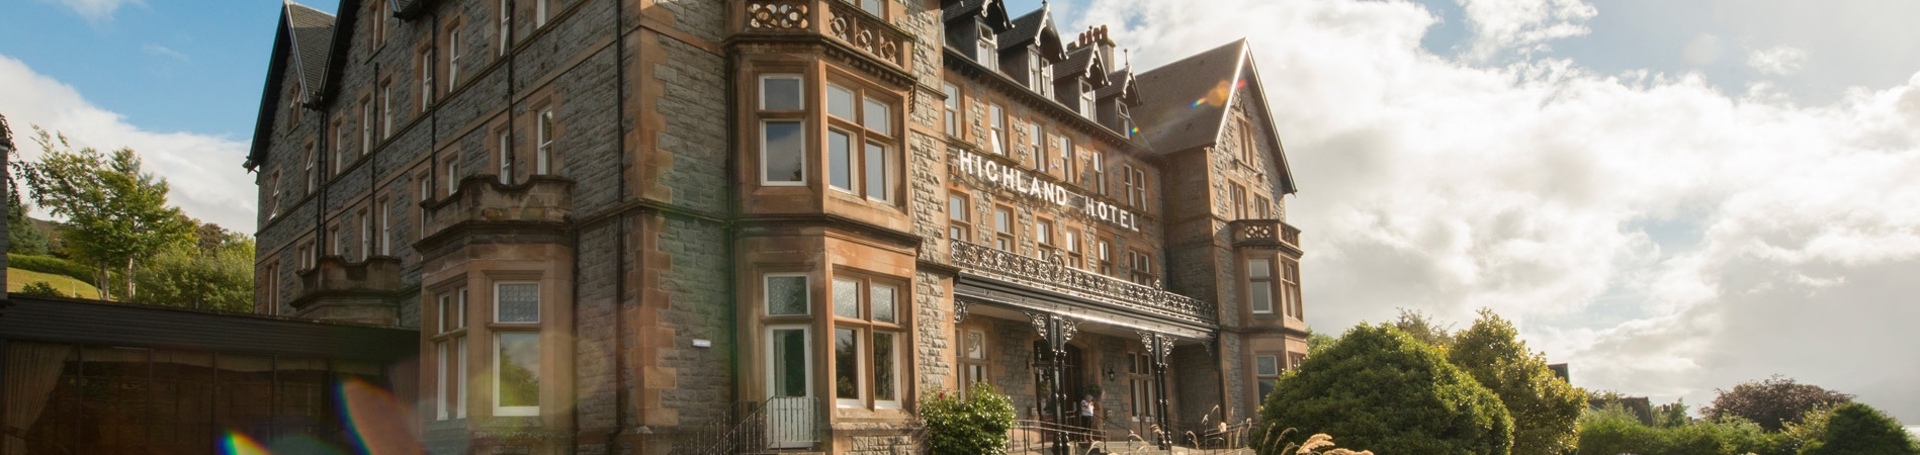 The Highland Hotel, enjoyed by customers of Lochs & Glens Coach Tours